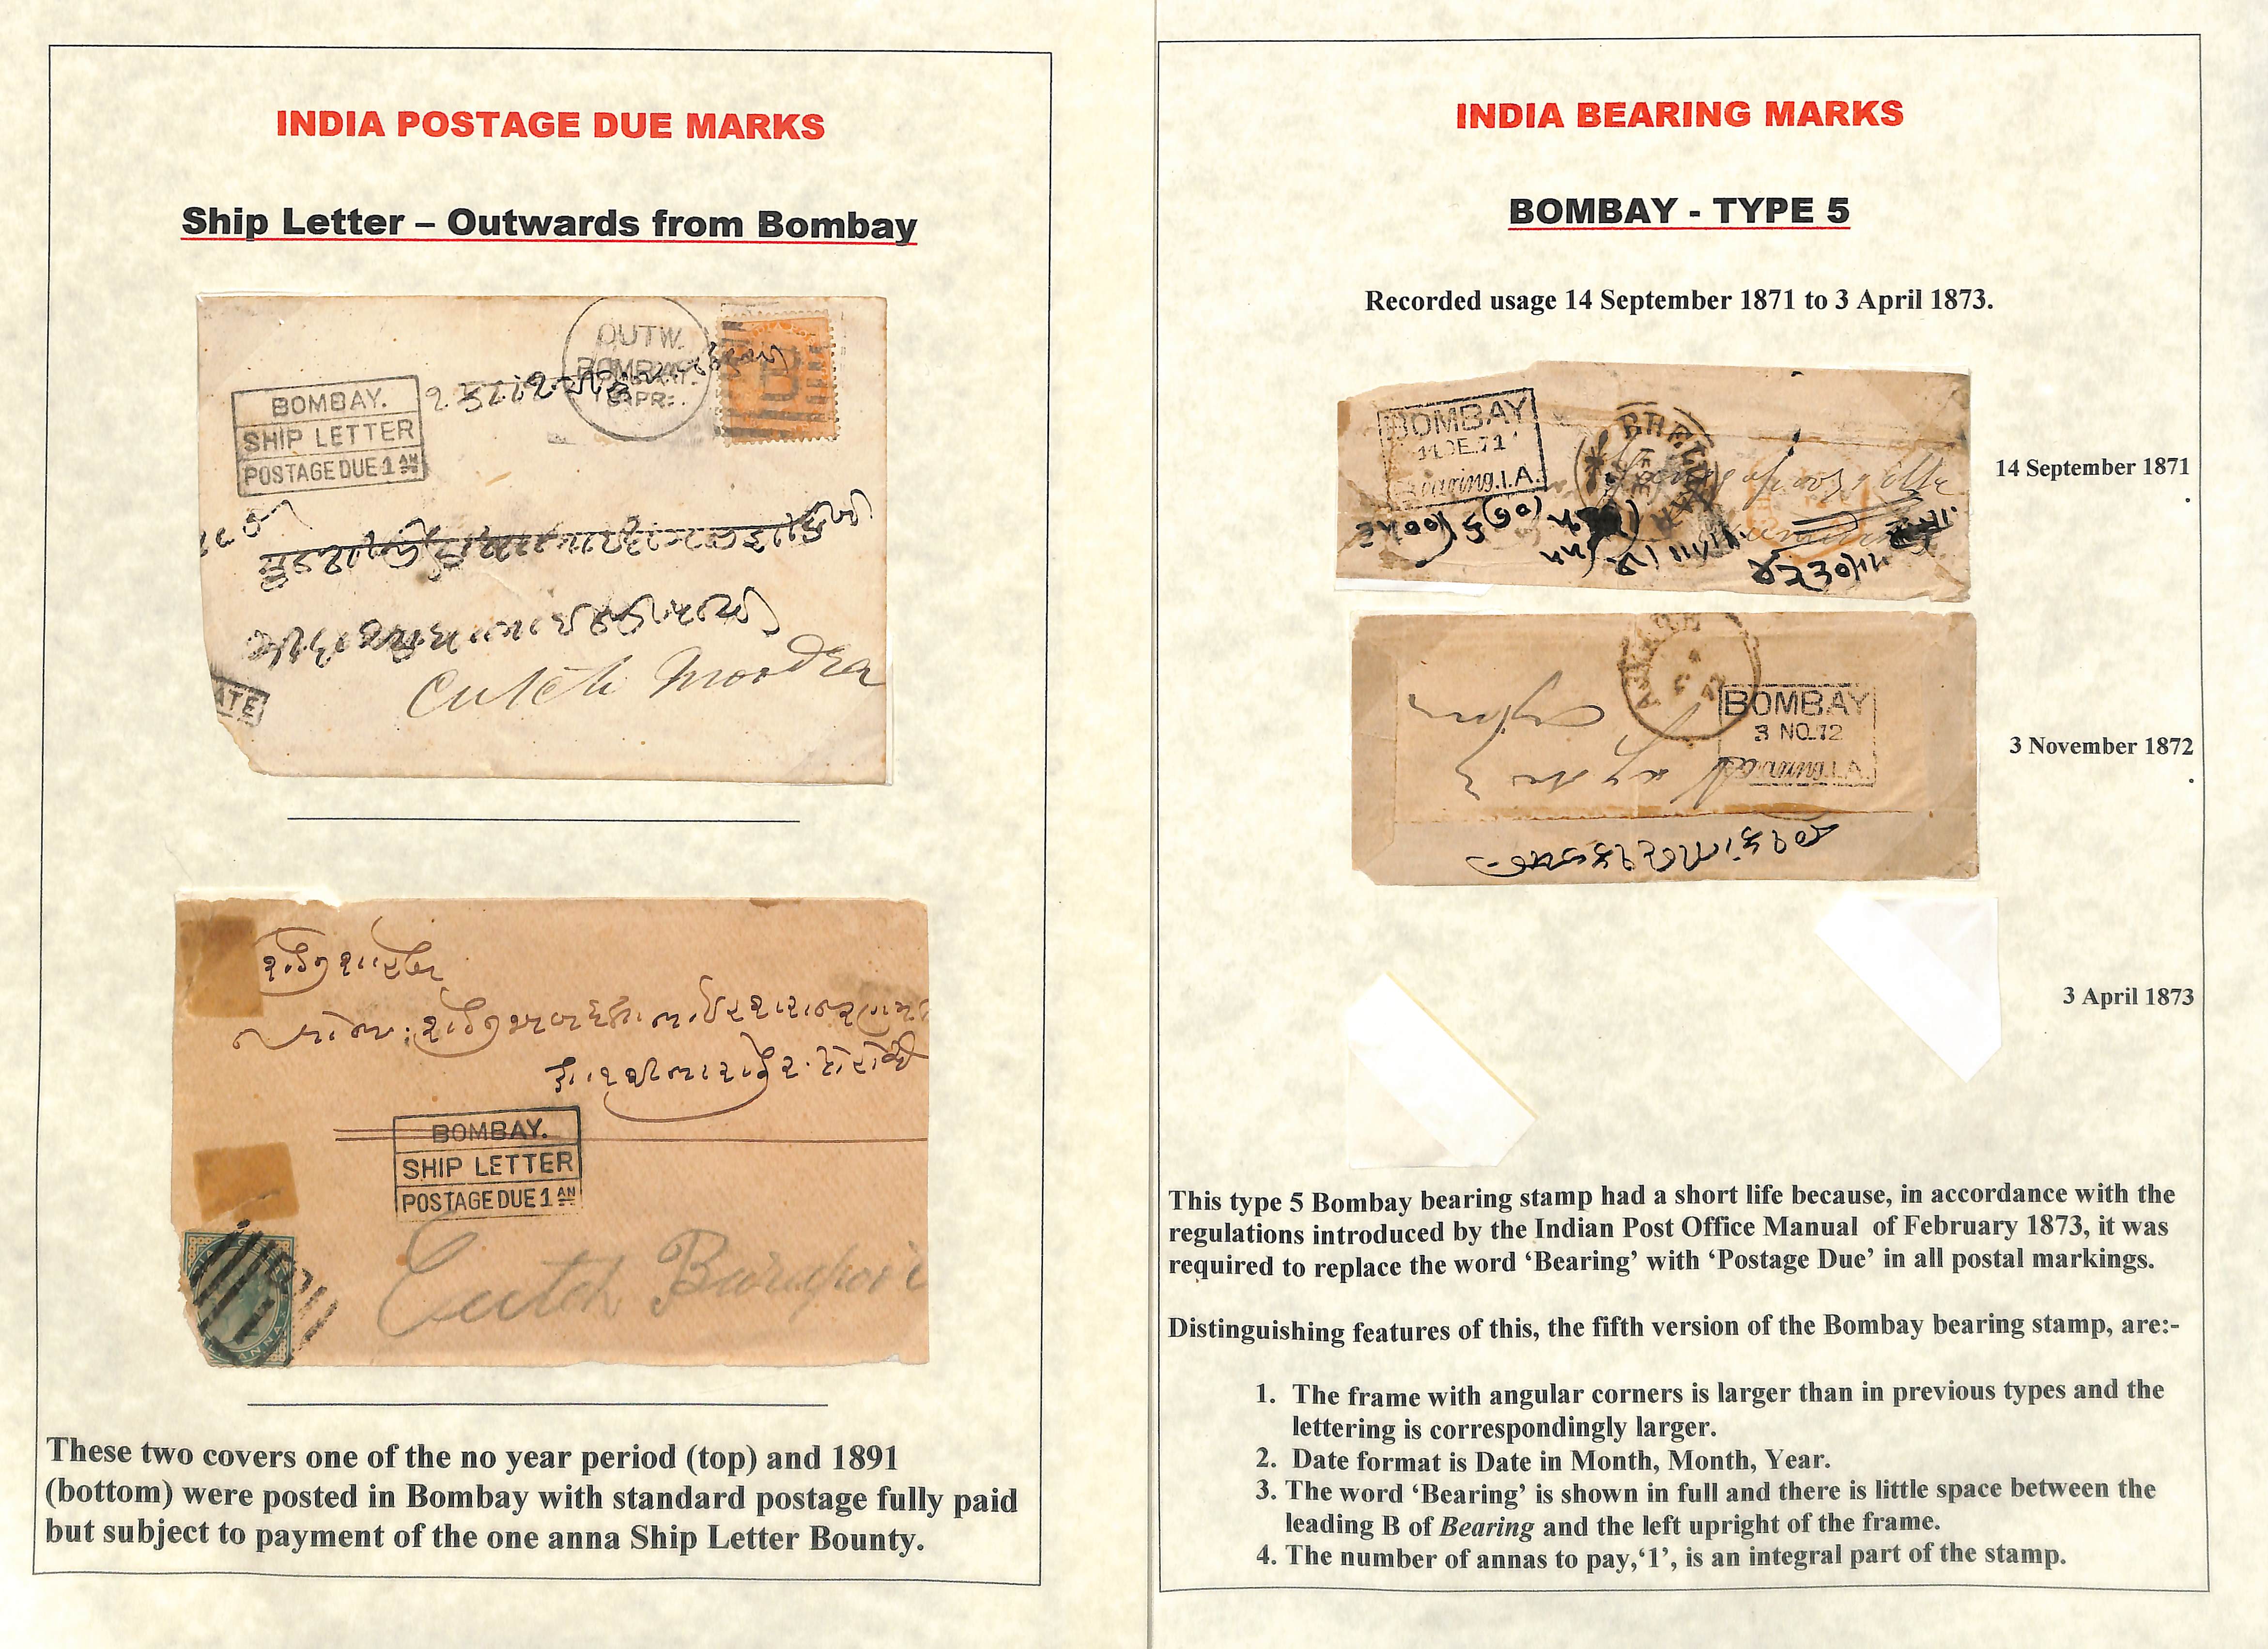 Bombay. 1860-1901 Covers with Bombay Postage Due or Bearing handstamps, the study of types with